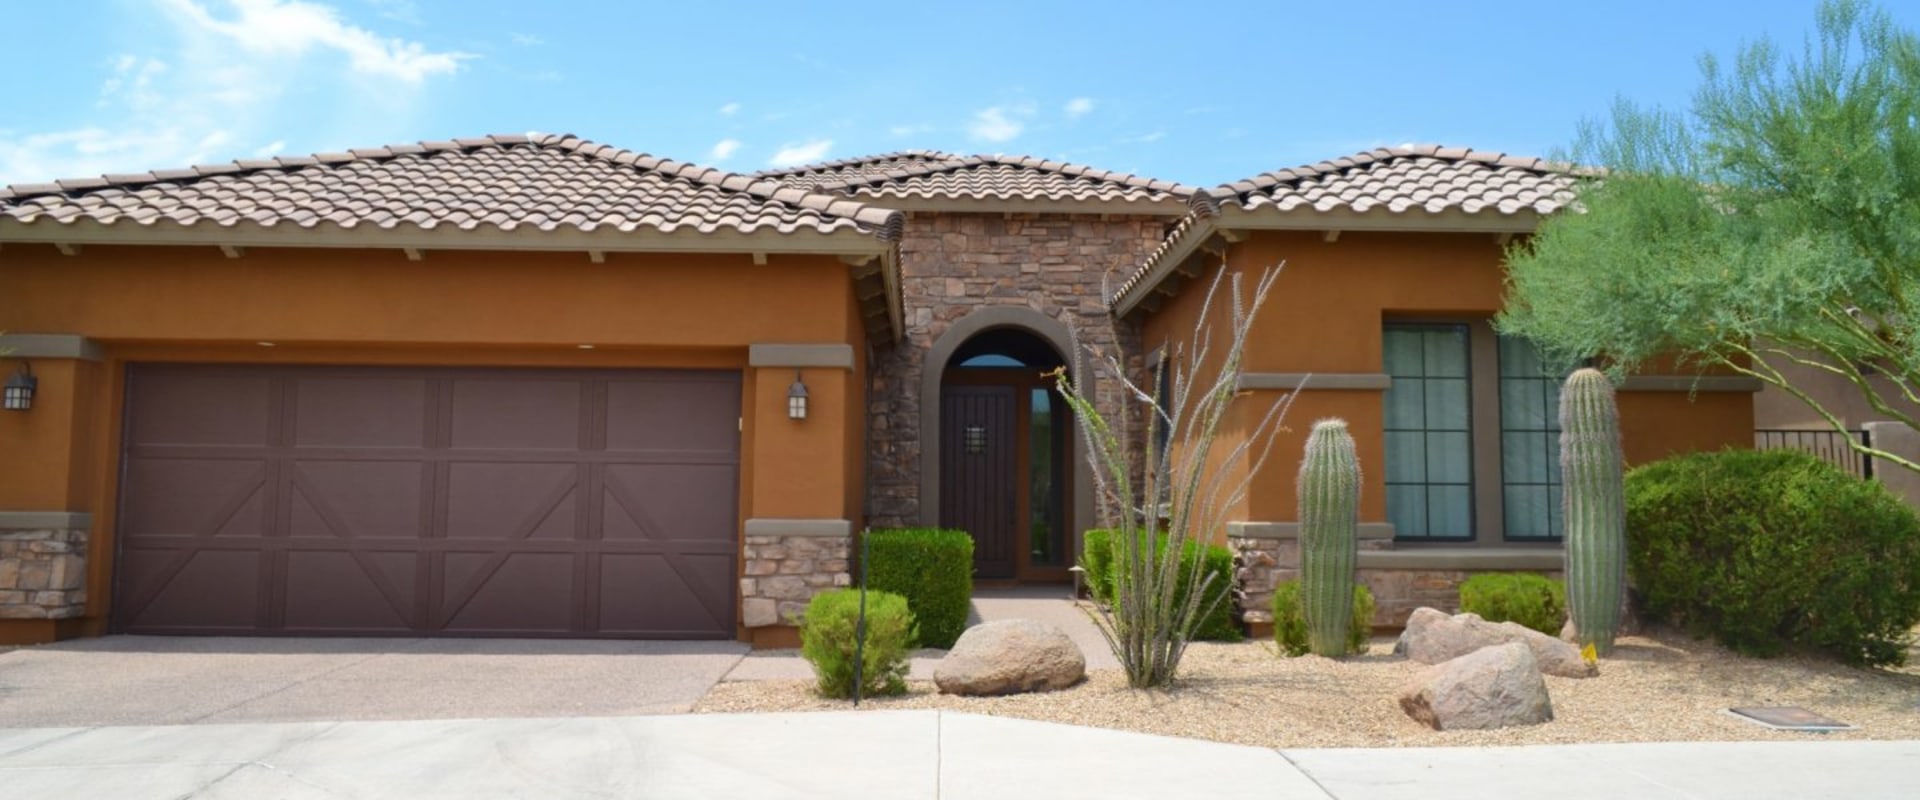 Types of Mortgages Available in Arizona